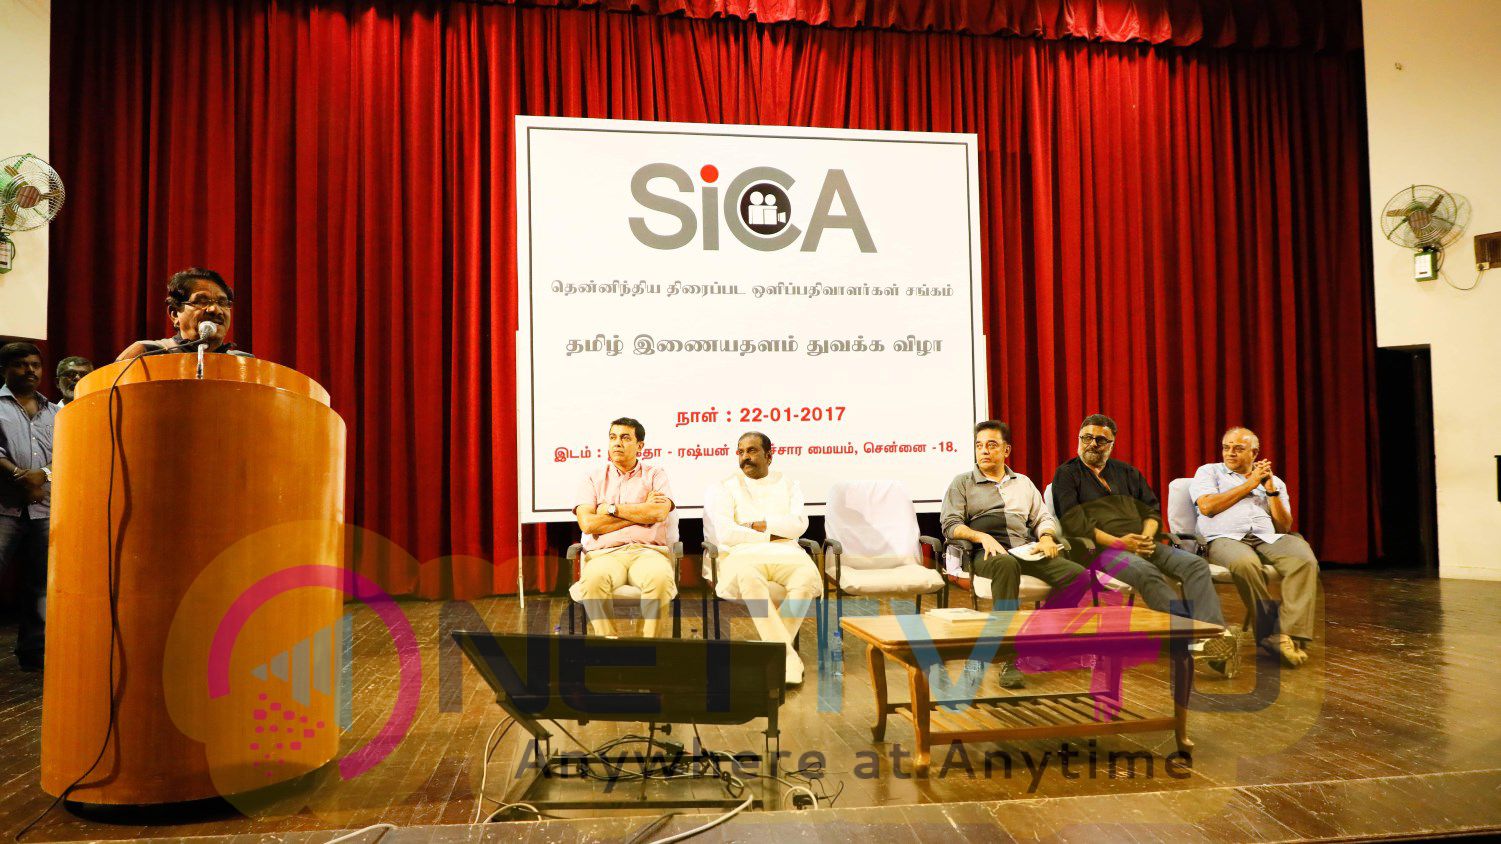  SICA Tamil Website Launch Images  Tamil Gallery